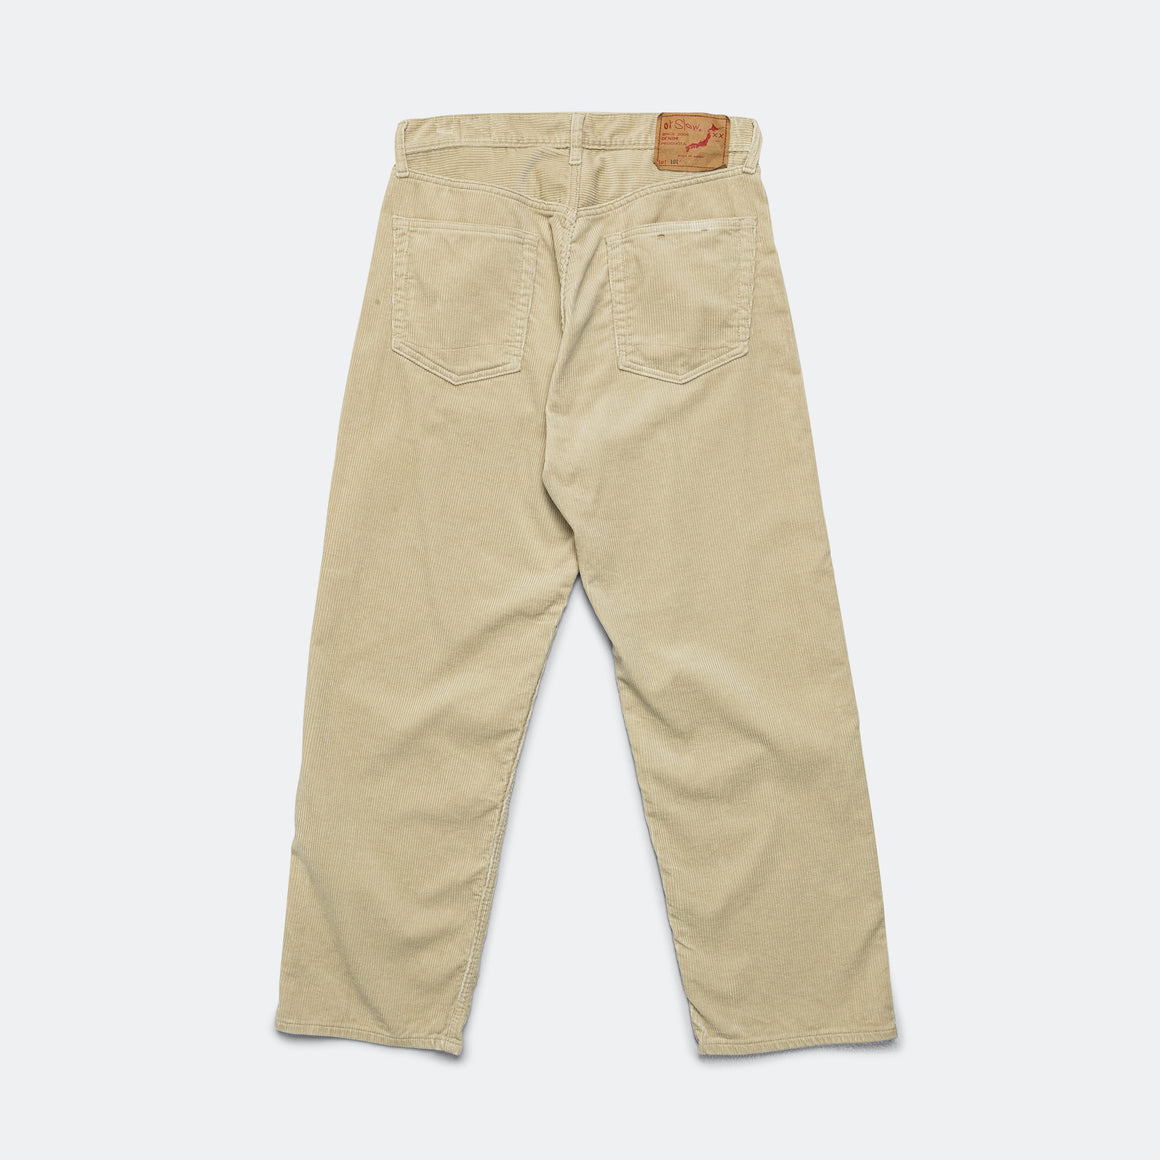 orSlow - 101 Dad's Fit Corduroy Pants - Ivory - UP THERE